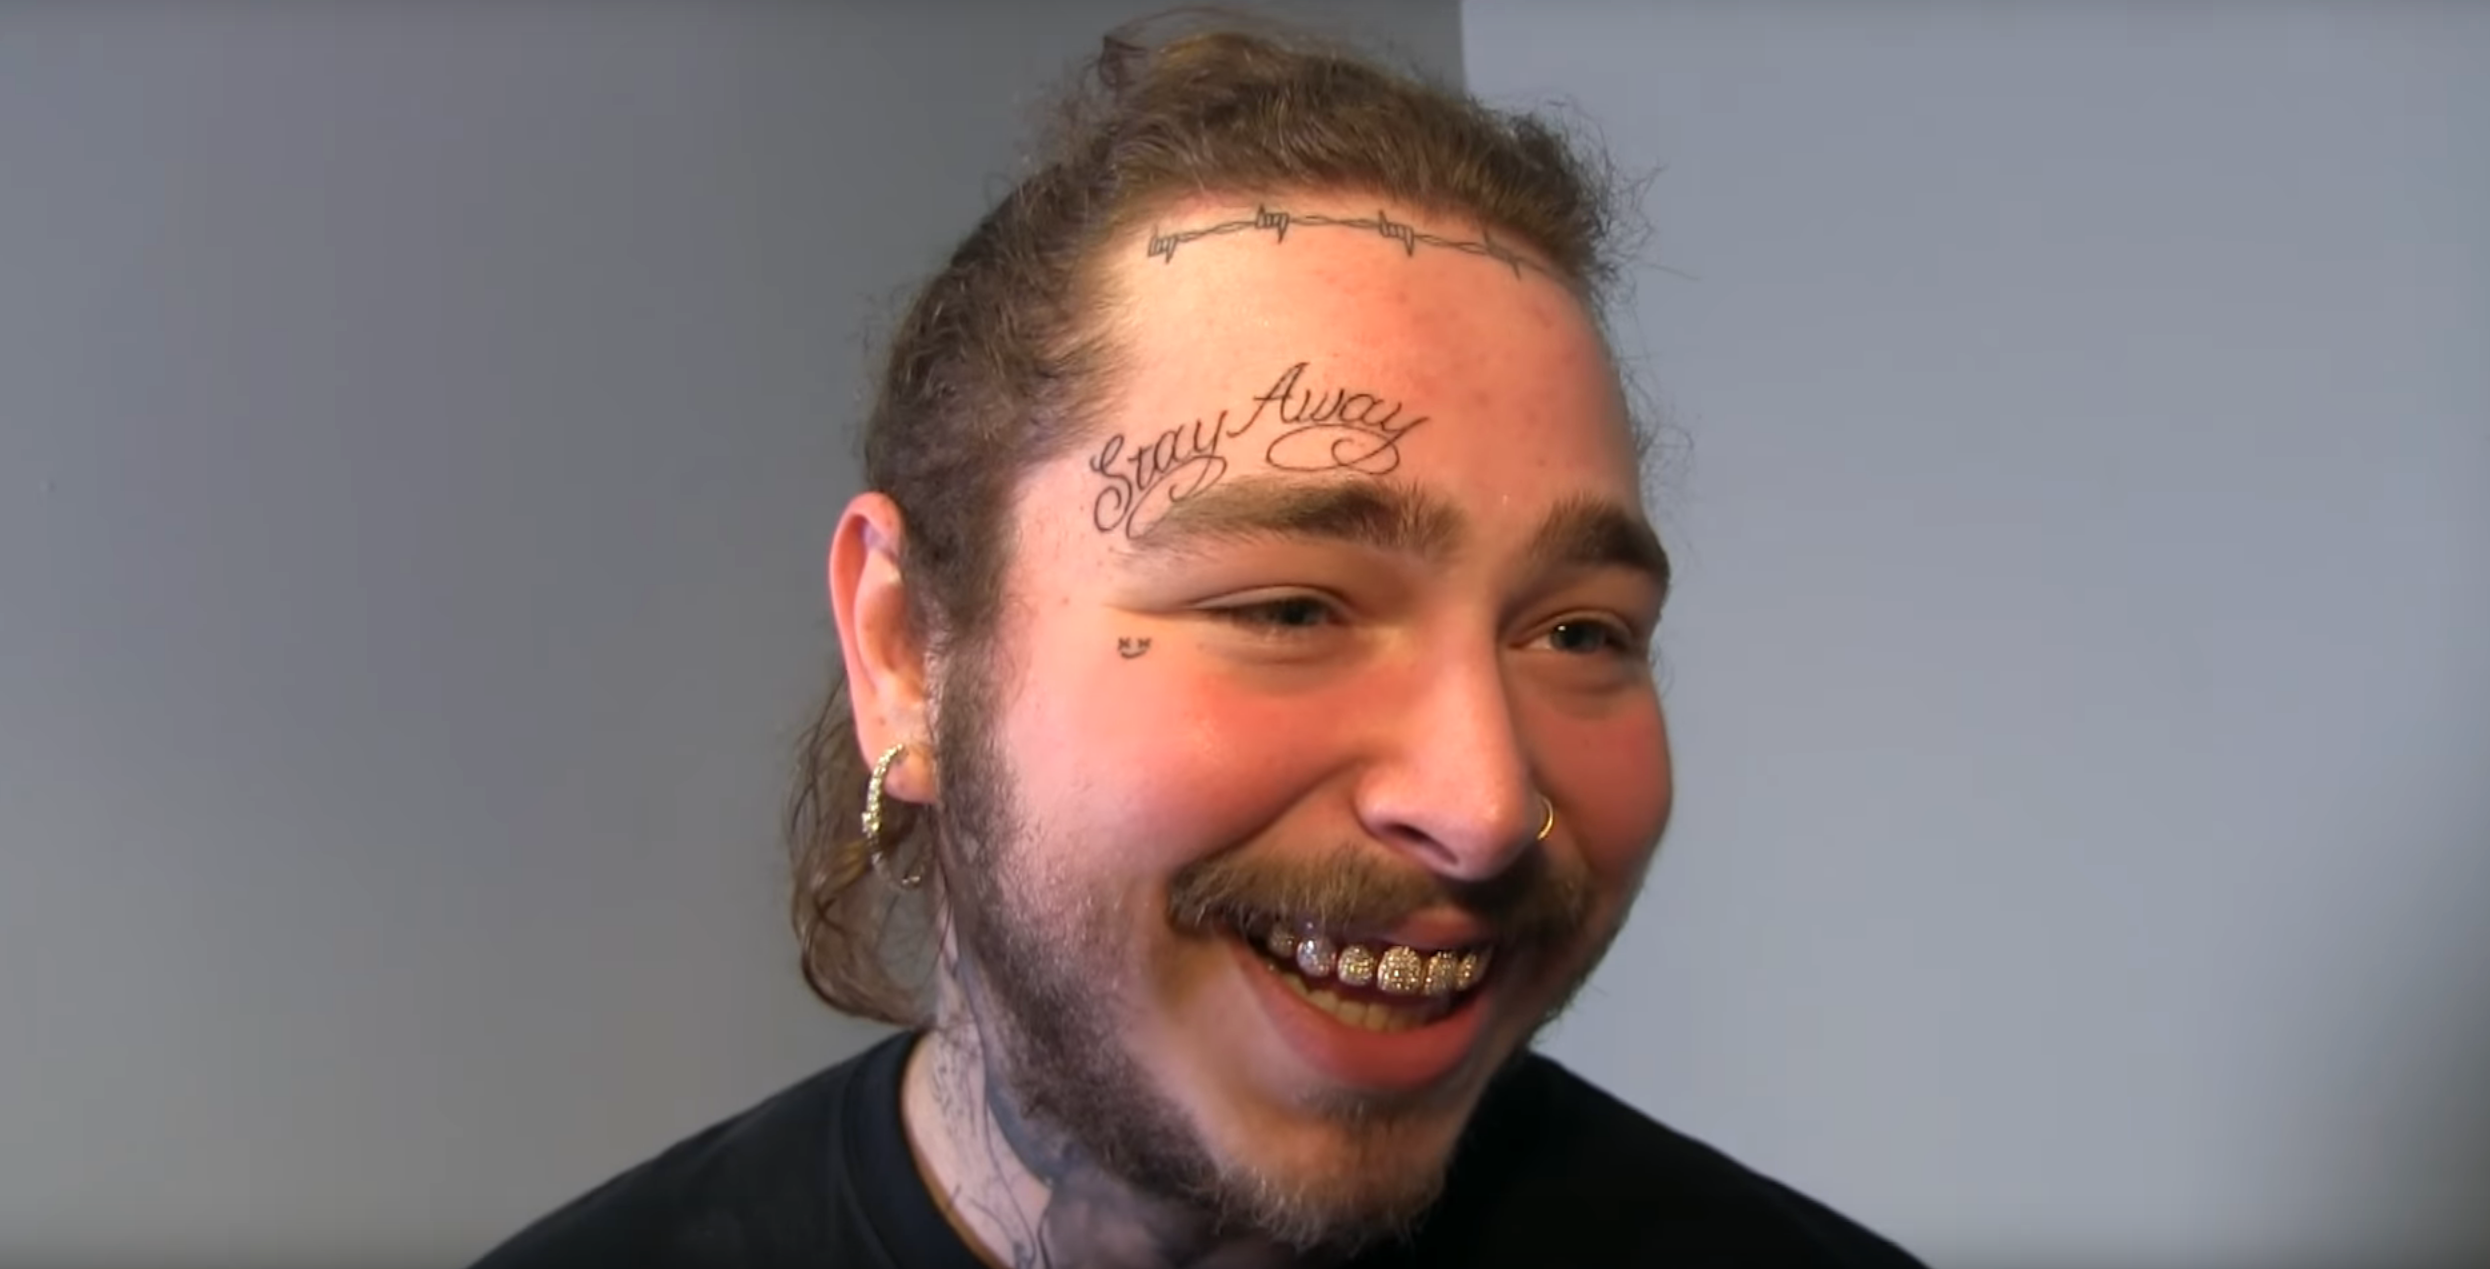 young rappers face tattoos